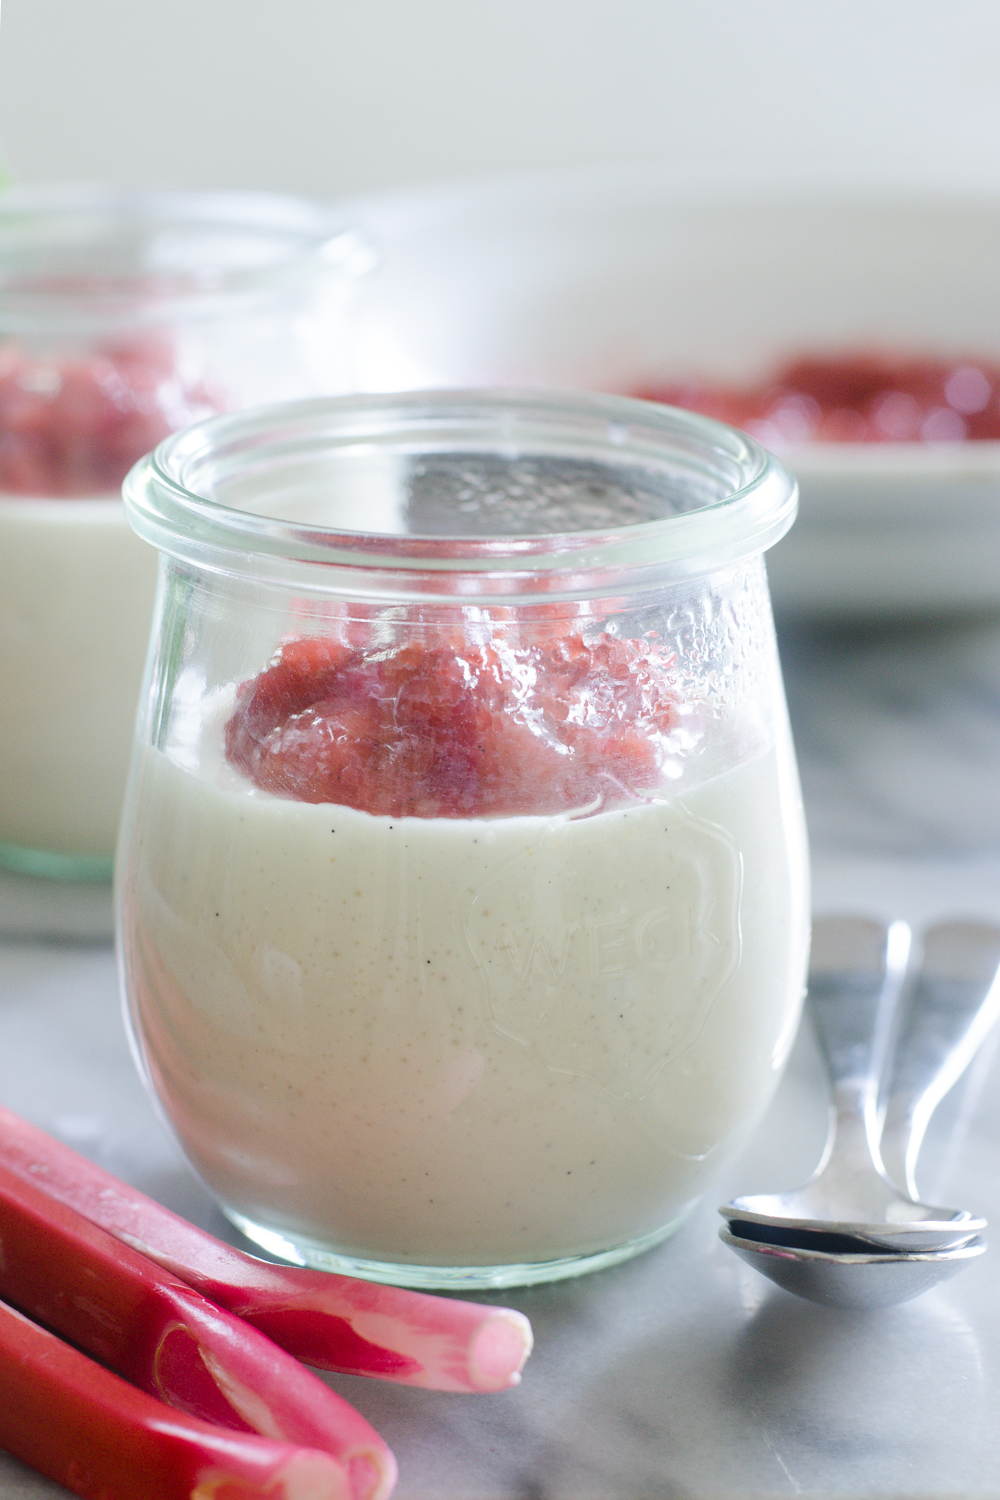 Russian Cream (or Sour Cream Panna Cotta) -- a slightly tangy, delightfully creamy dessert. It's stupidly easy to make.